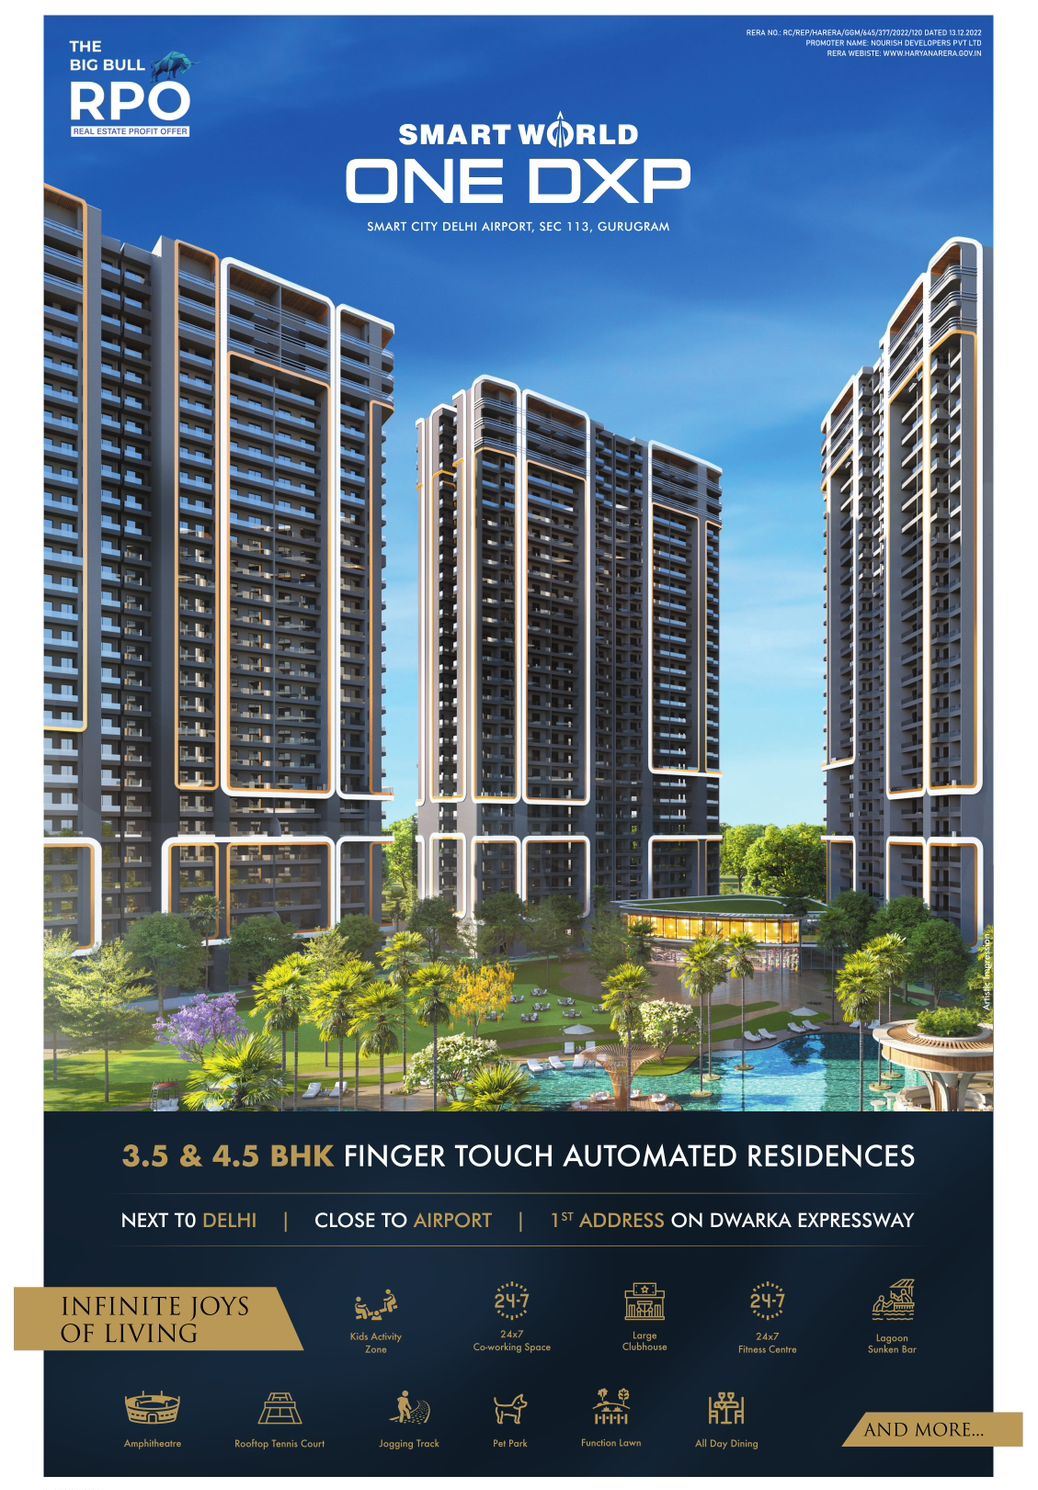 Book 3.5 and 4.5 BHK finger touch automated residences at Smart World One DXP in Sector 113, Gurgaon Update